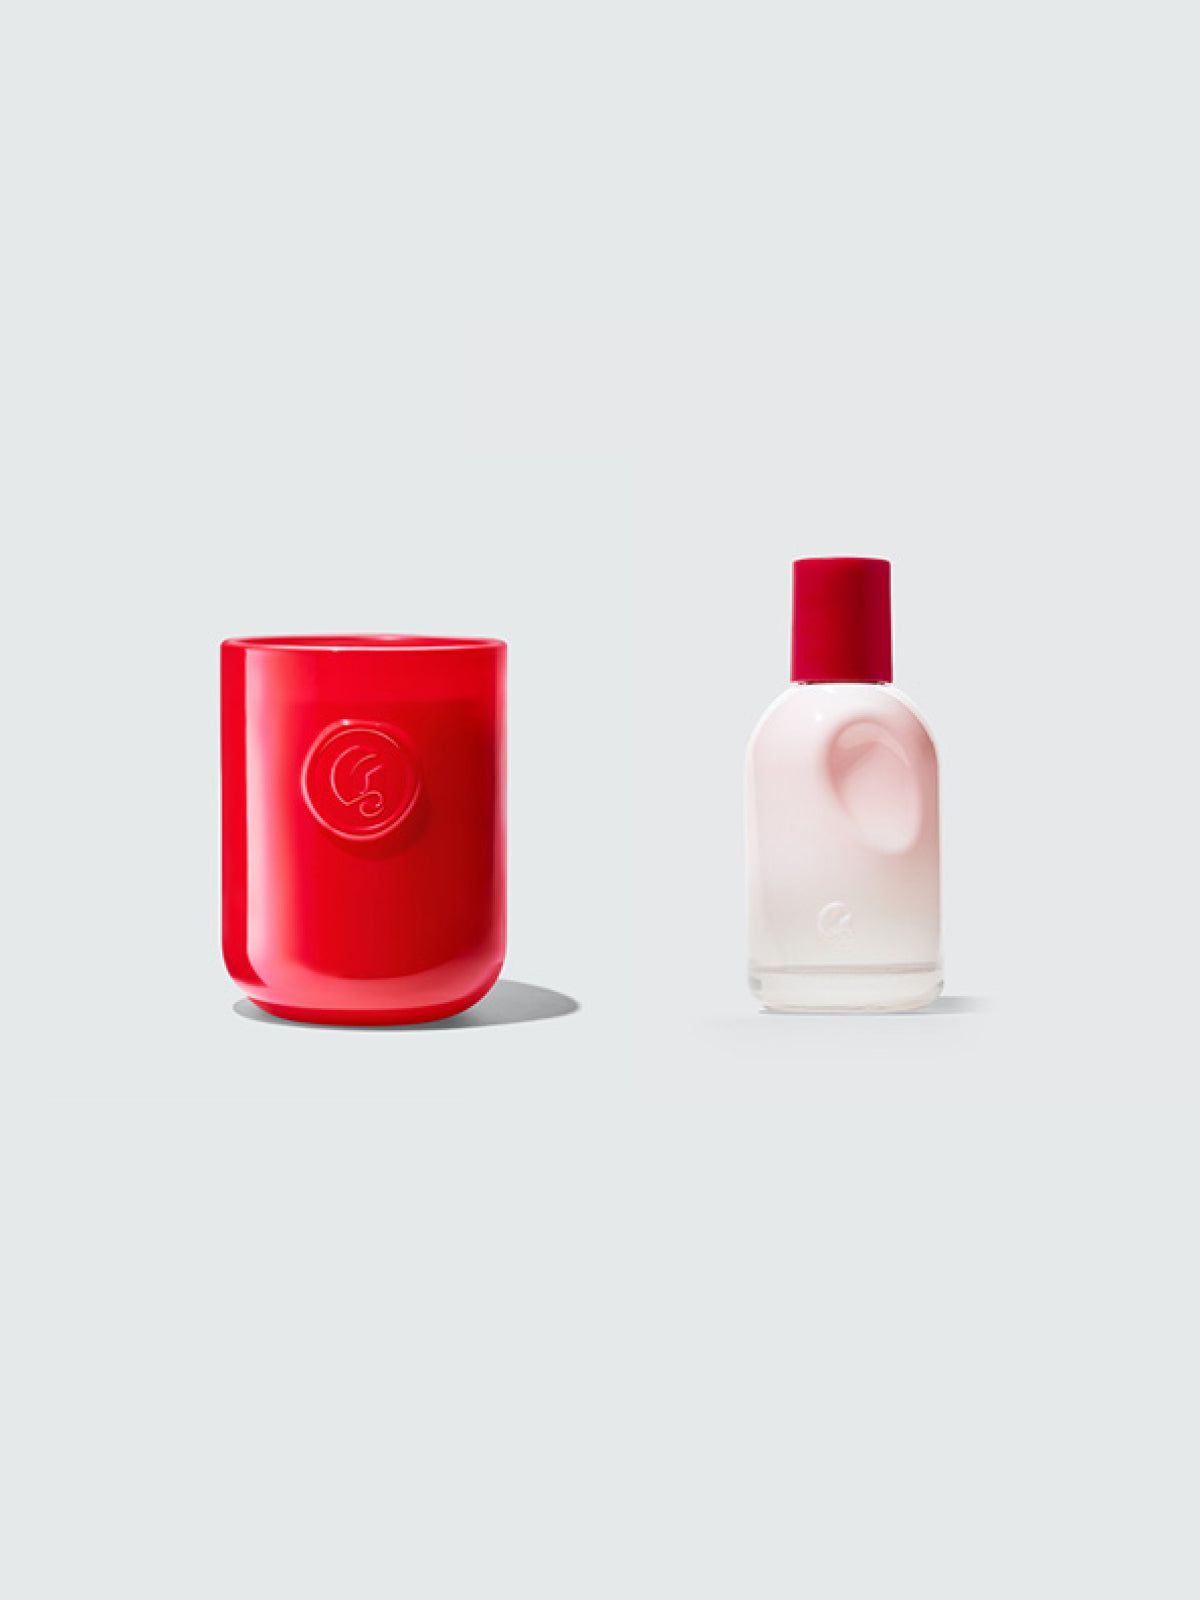 Glossier had finally launched a 'You' scented candle